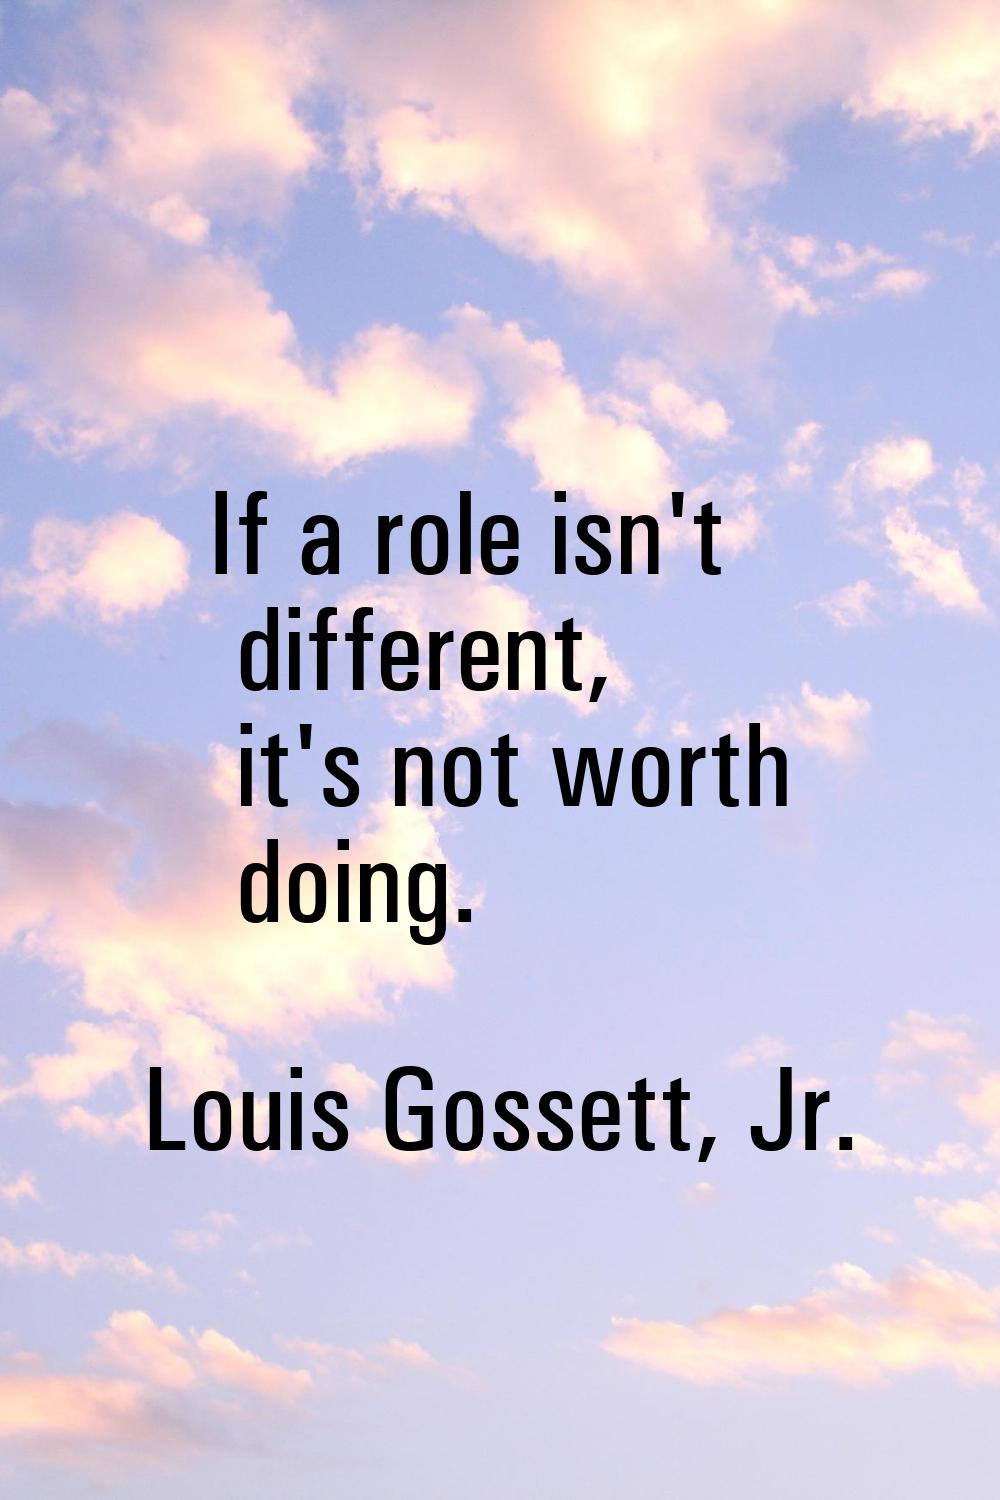 If a role isn't different, it's not worth doing.